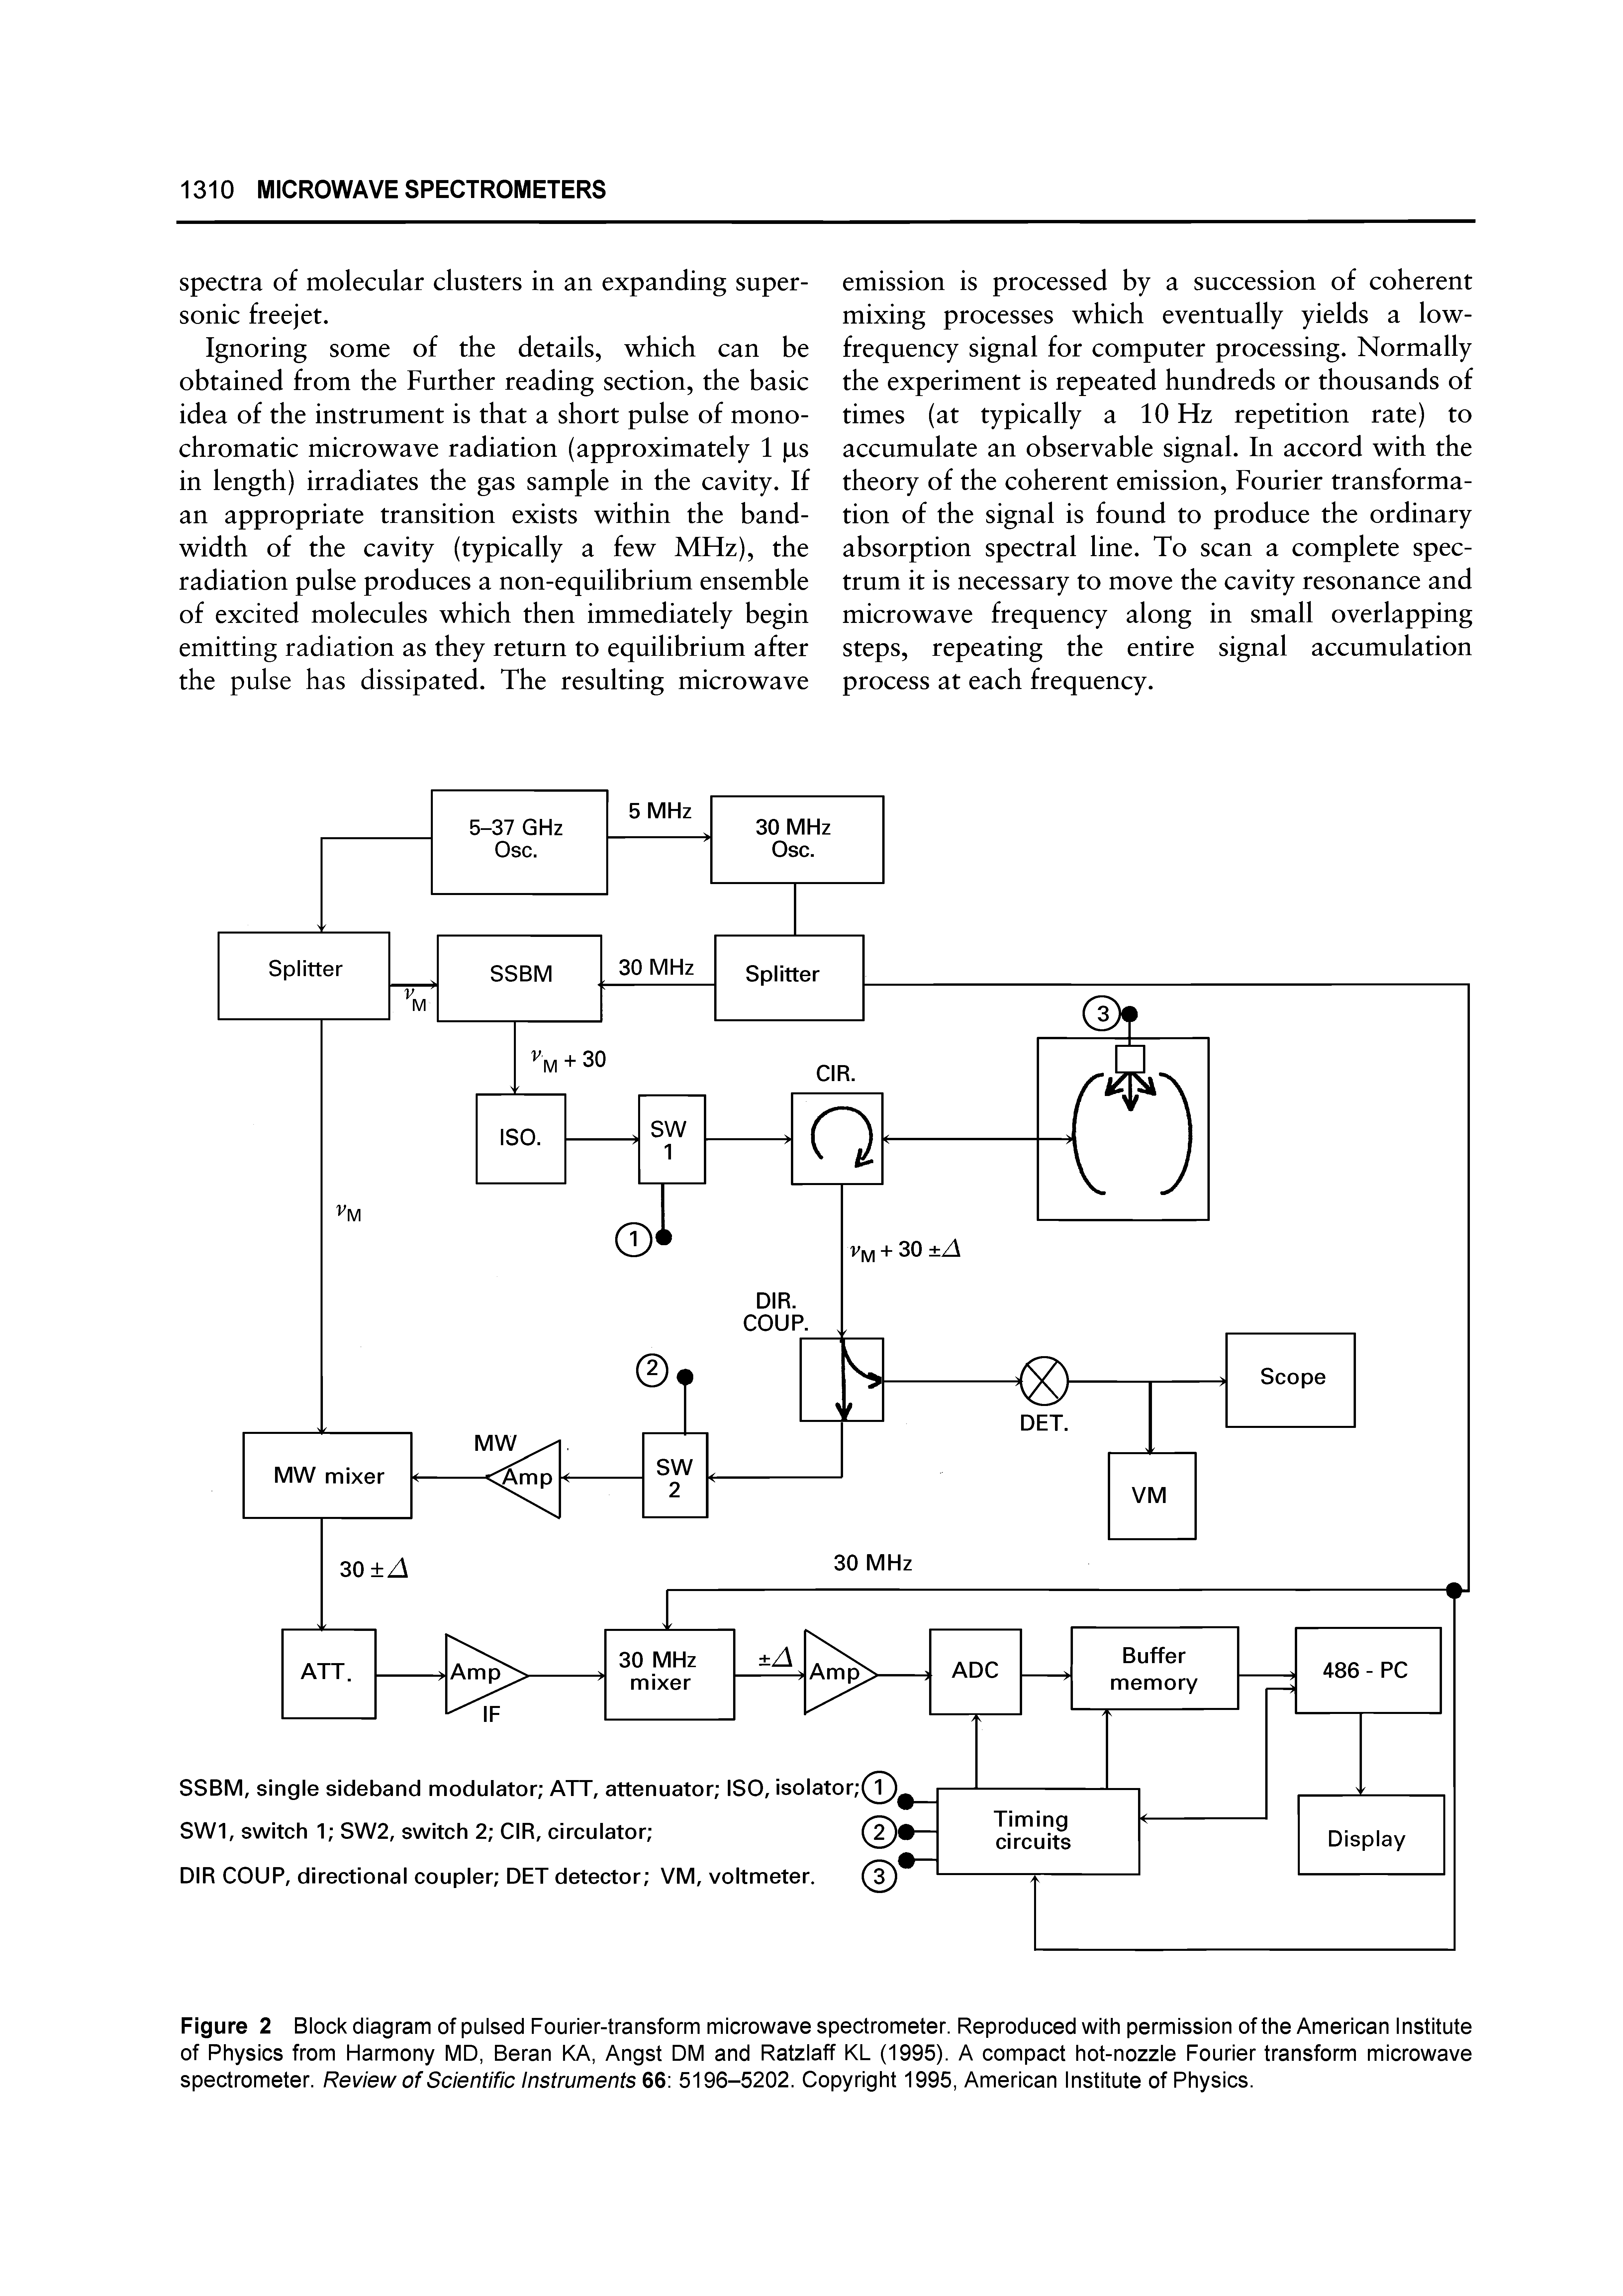 Figure 2 Block diagram of pulsed Fourier-transform microwave spectrometer. Reproduced with permission of the American Institute of Physics from Harmony MD, Reran KA, Angst DM and Ratzlaff KL (1995). A compact hot-nozzle Fourier transform microwave spectrometer. Review of Scientific Instruments 66 5196-5202. Copyright 1995, American Institute of Physics.